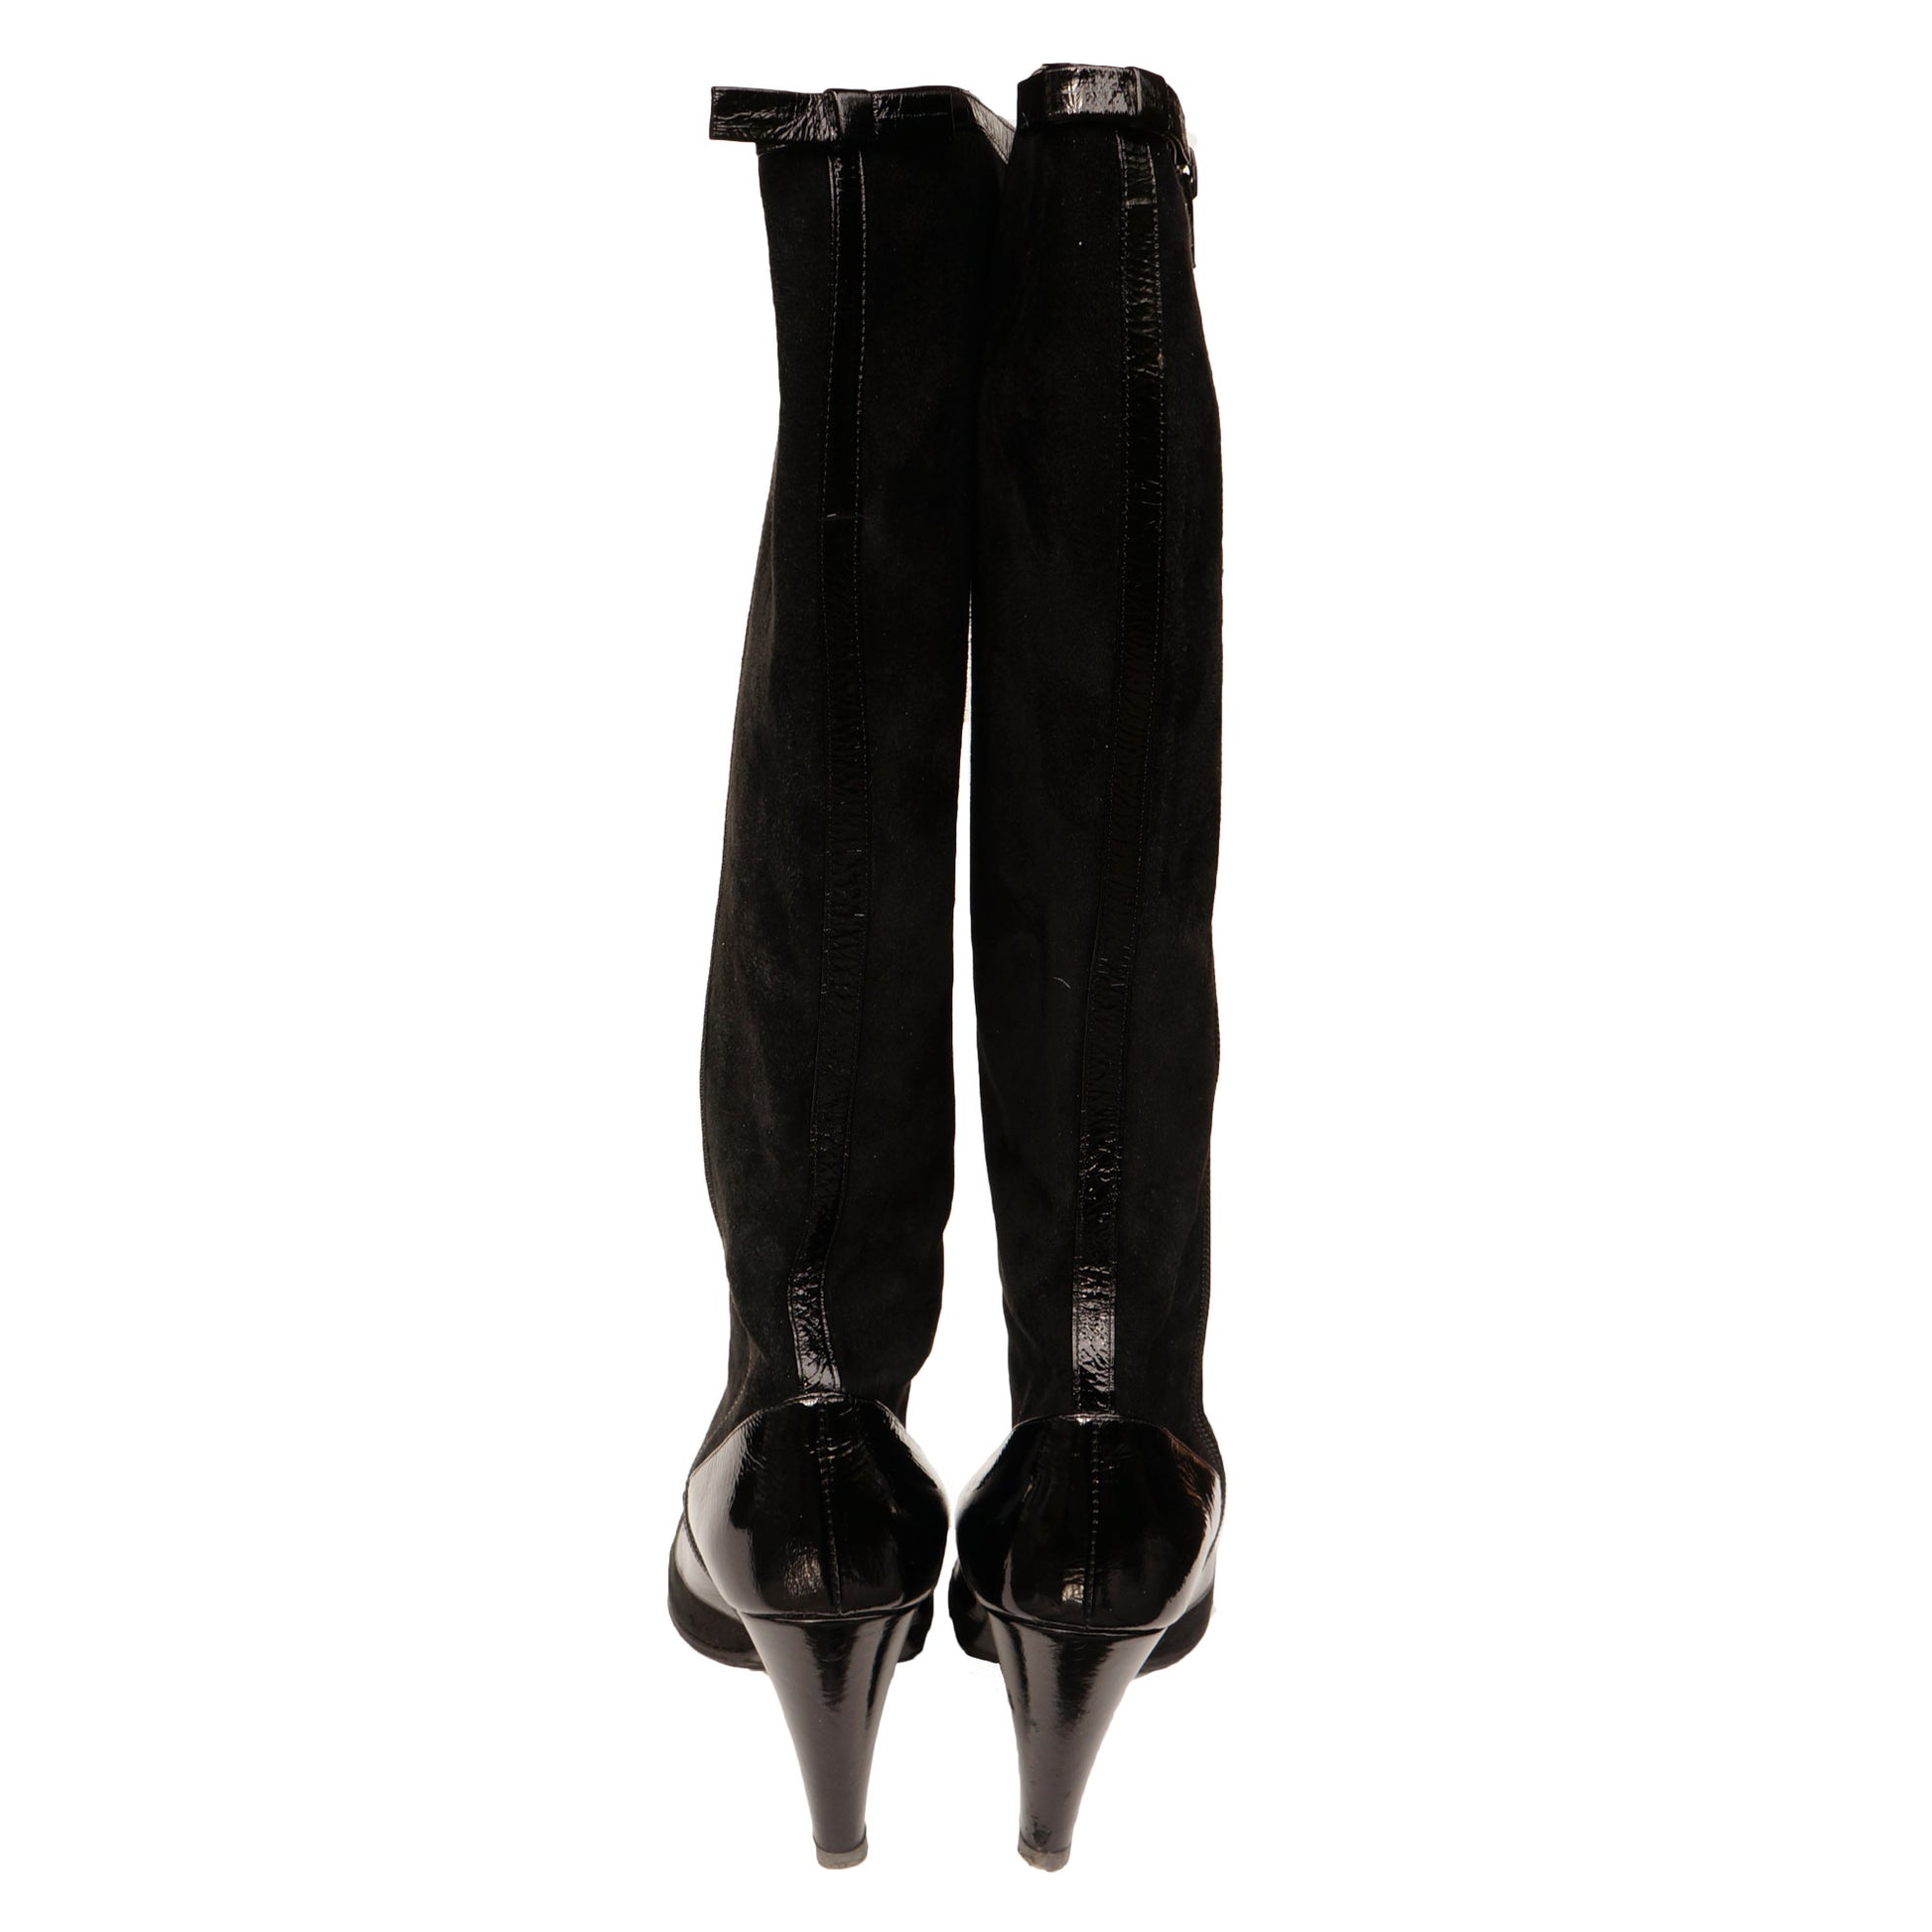 MARC BY MARC JACOBS SUEDE PATENT LEATHER TRIM KNEE  HIGHT BOOTS - leefluxury.com